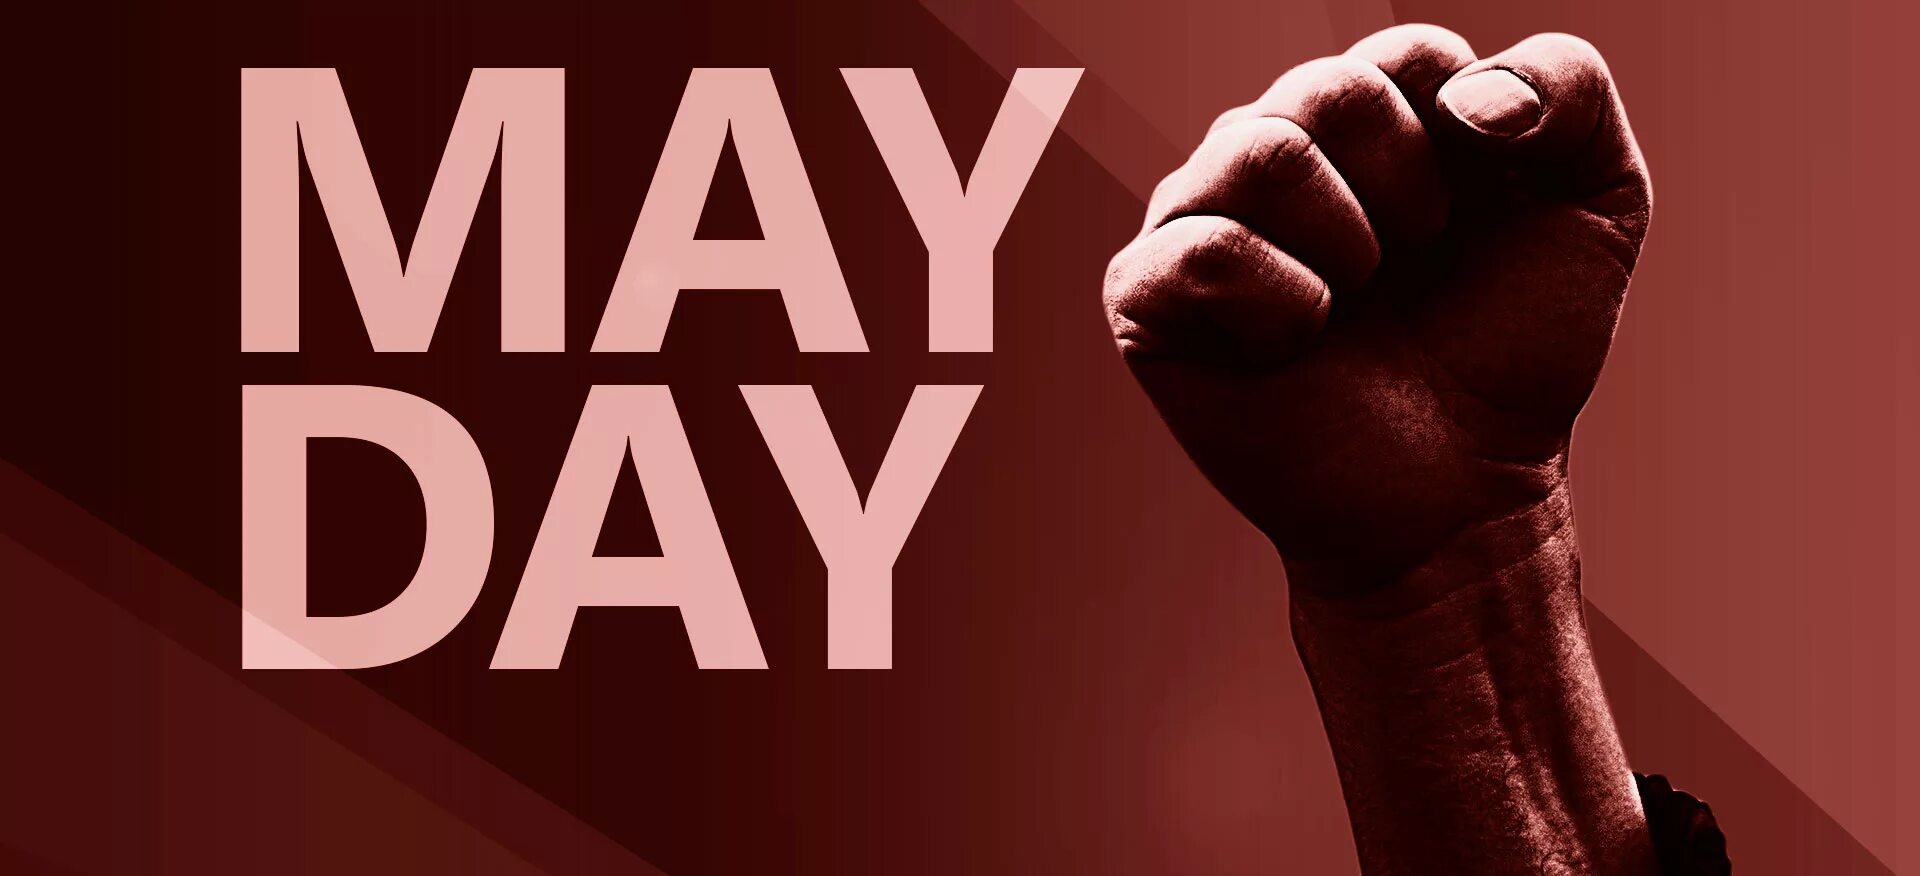 Day new form. May Day. Лабор дей. 1 May Day. Мэй Дэй картинки.